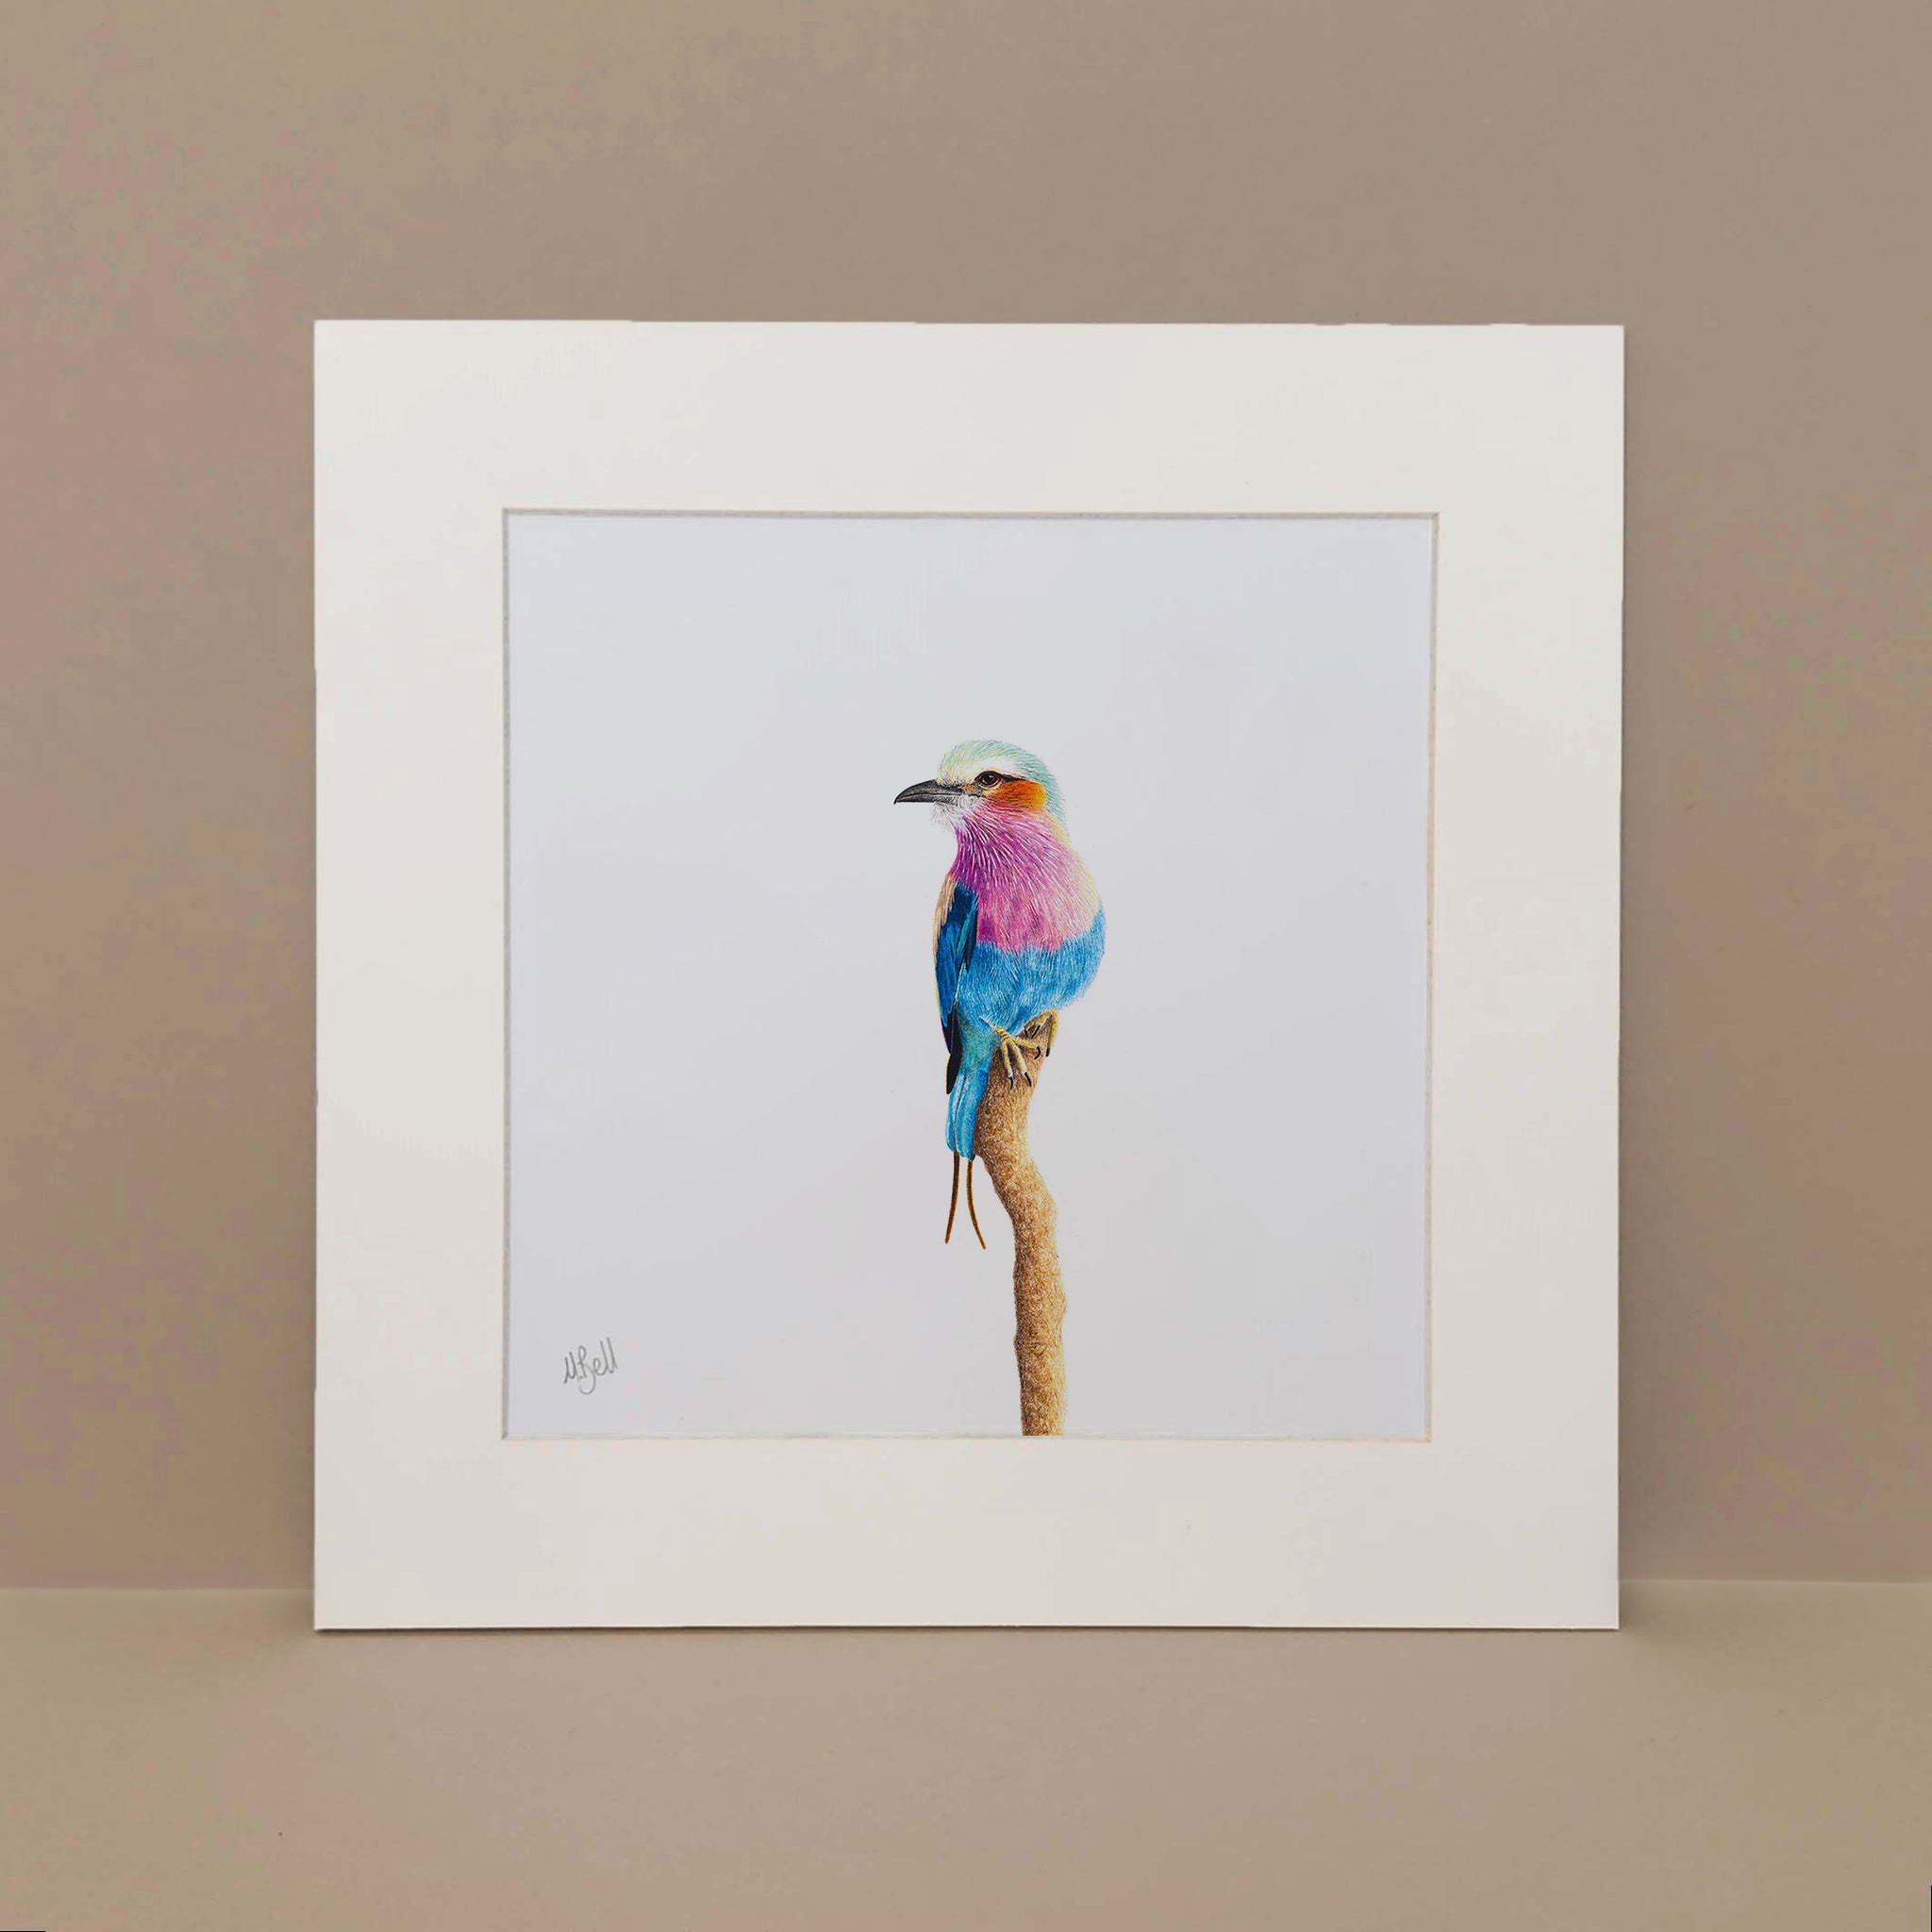 Lilac Breasted Roller pencil drawing by South African bird artist Matthew Bell